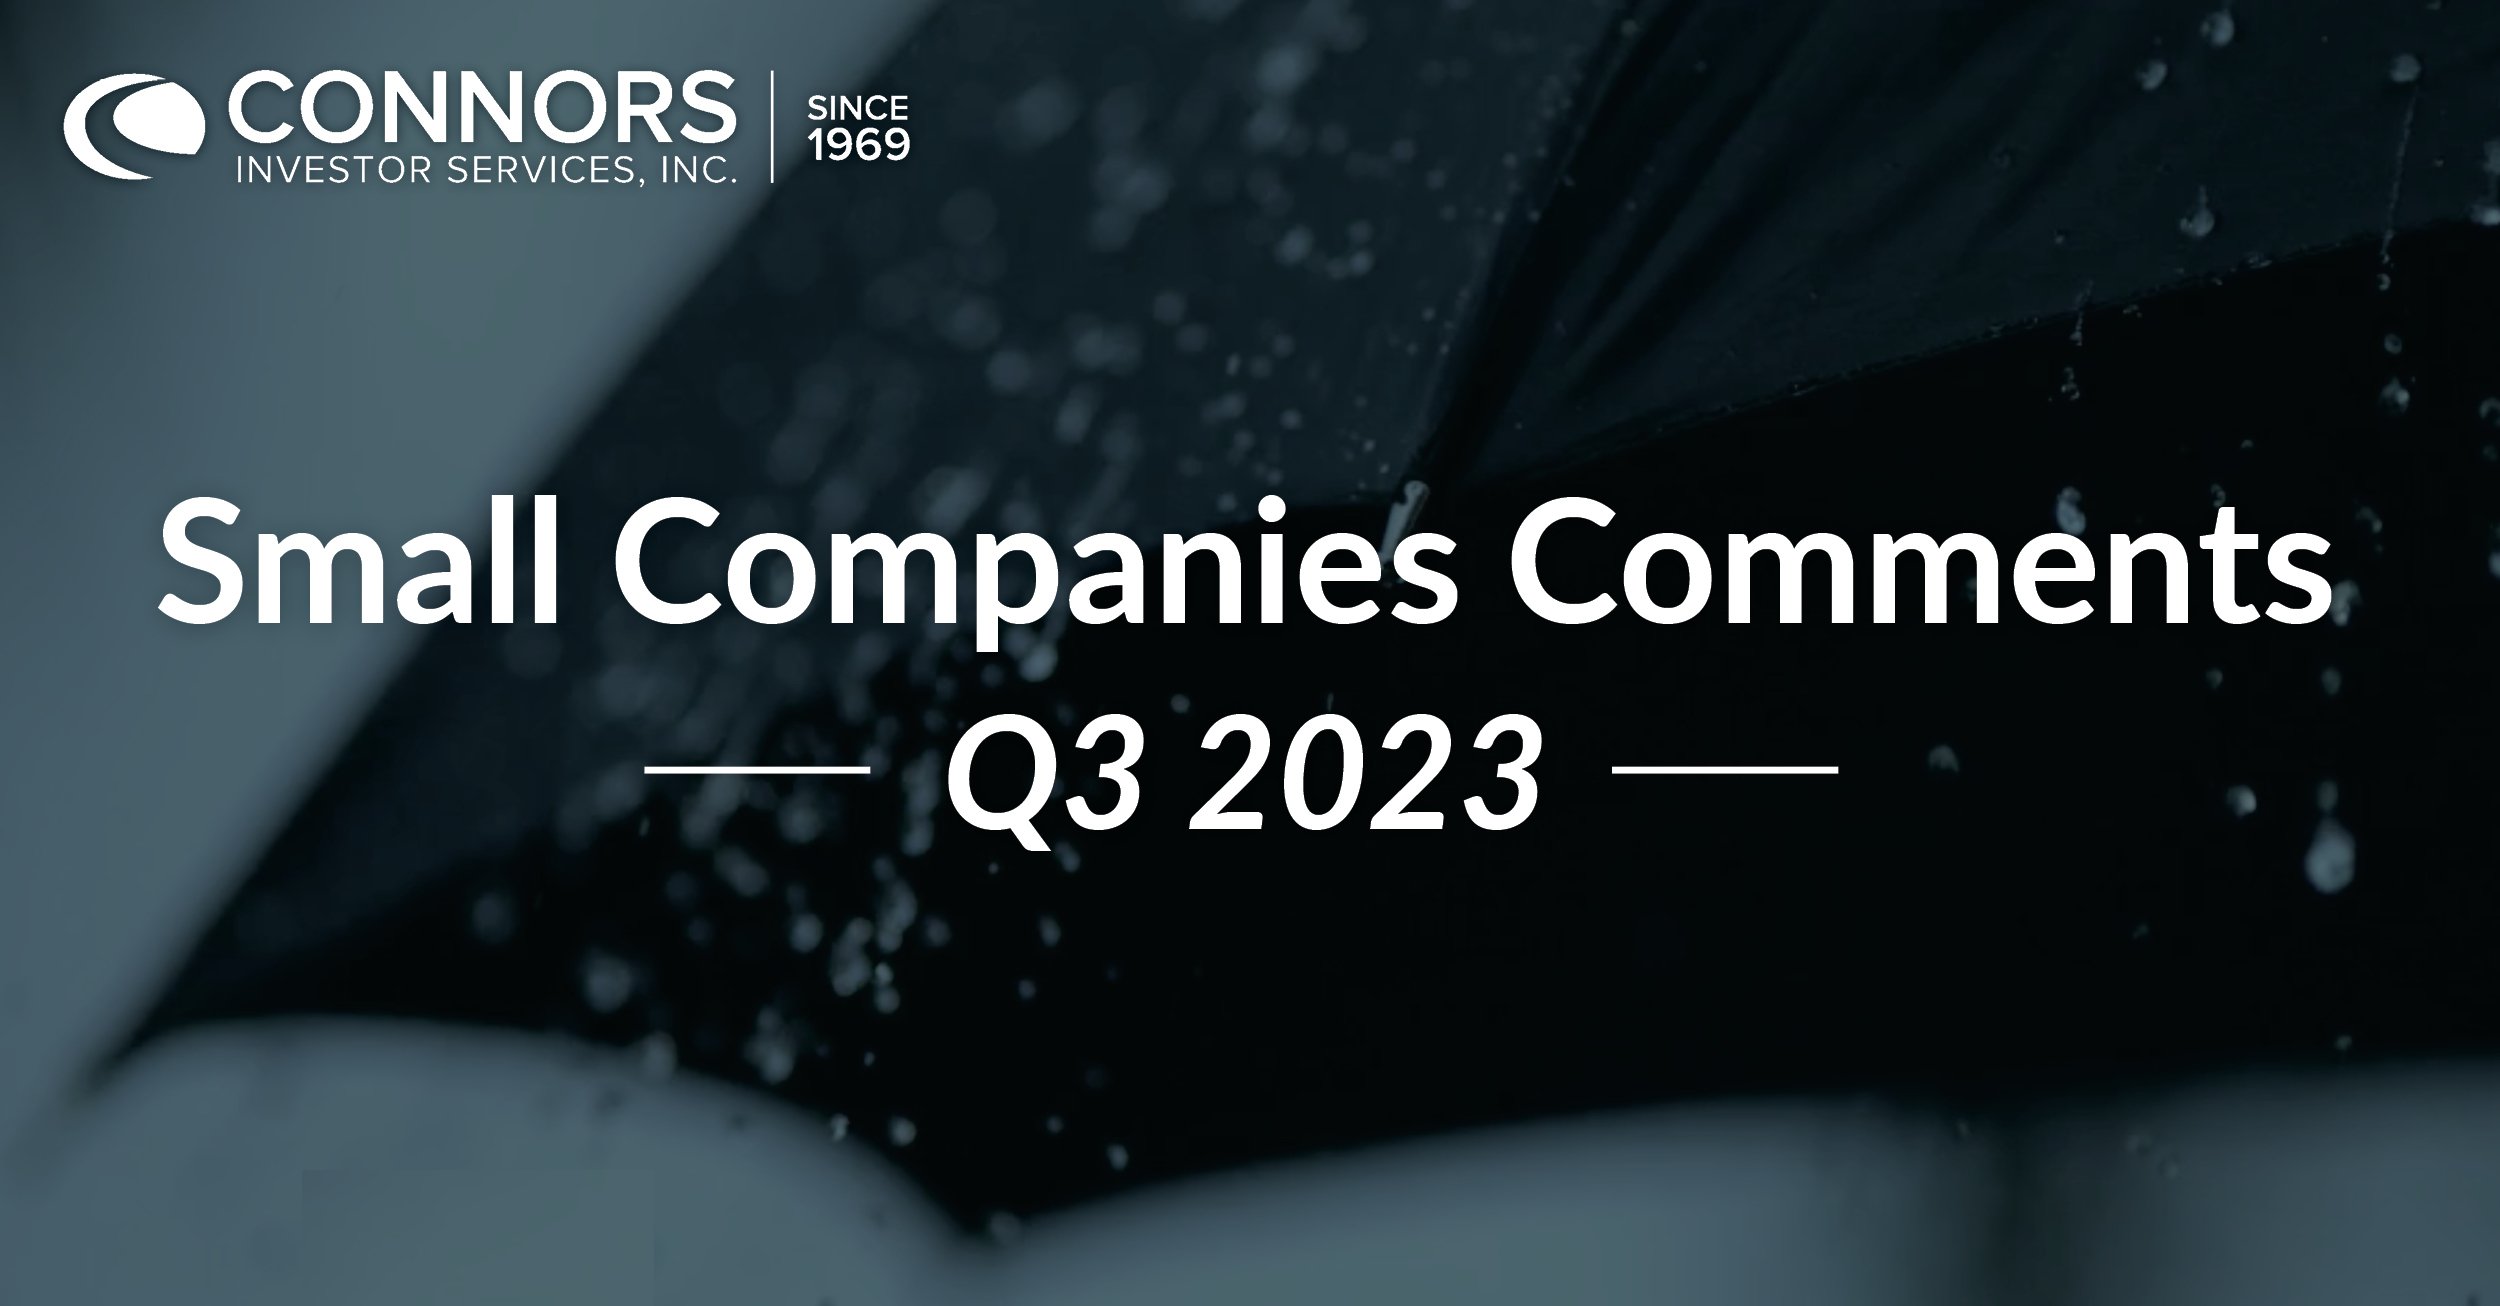 Q3 2023 Small Companies Comments